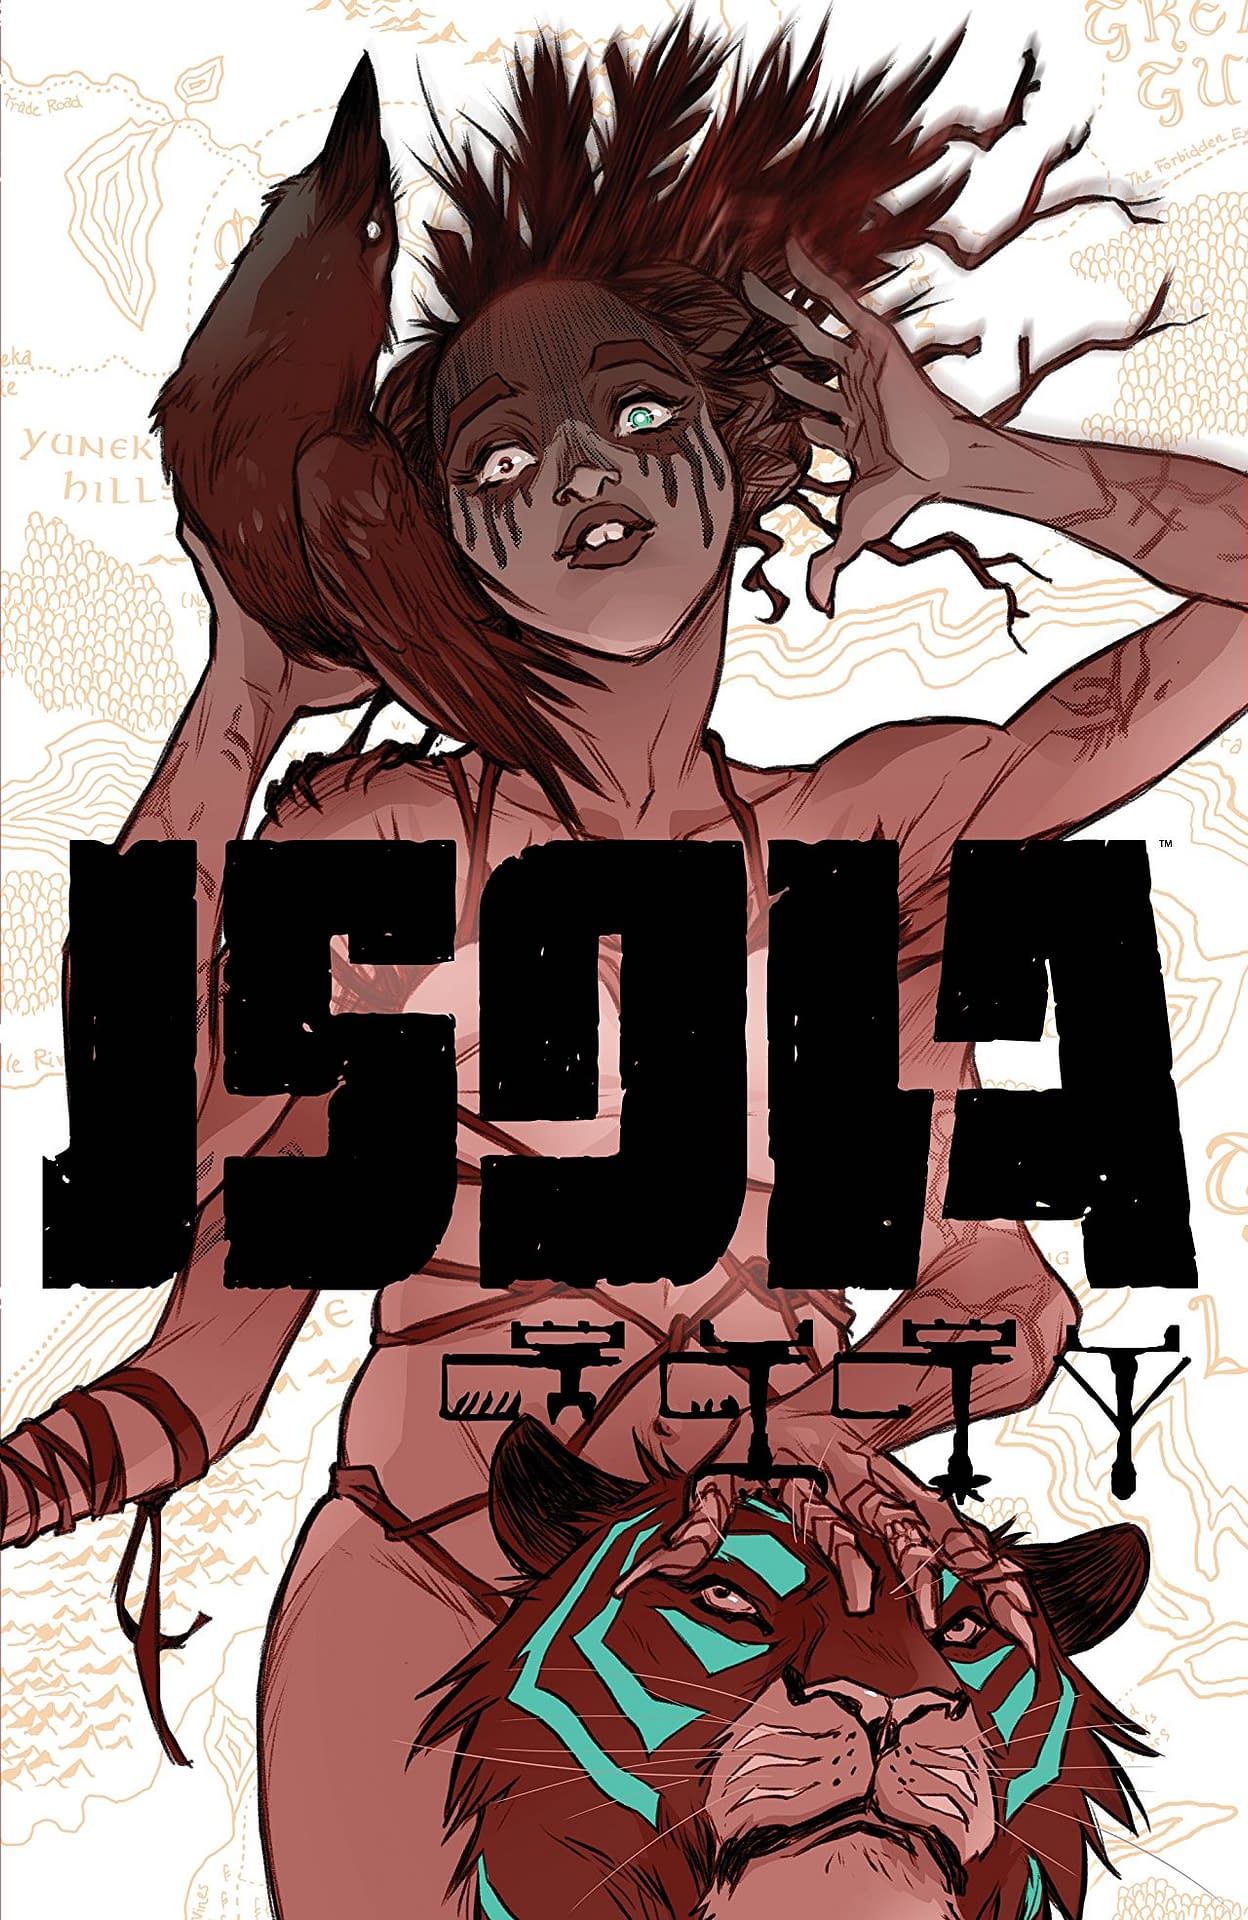 "Isola" #8 Brings a Stranger Into the Mix. Is She Friend or Foe? (REVIEW)